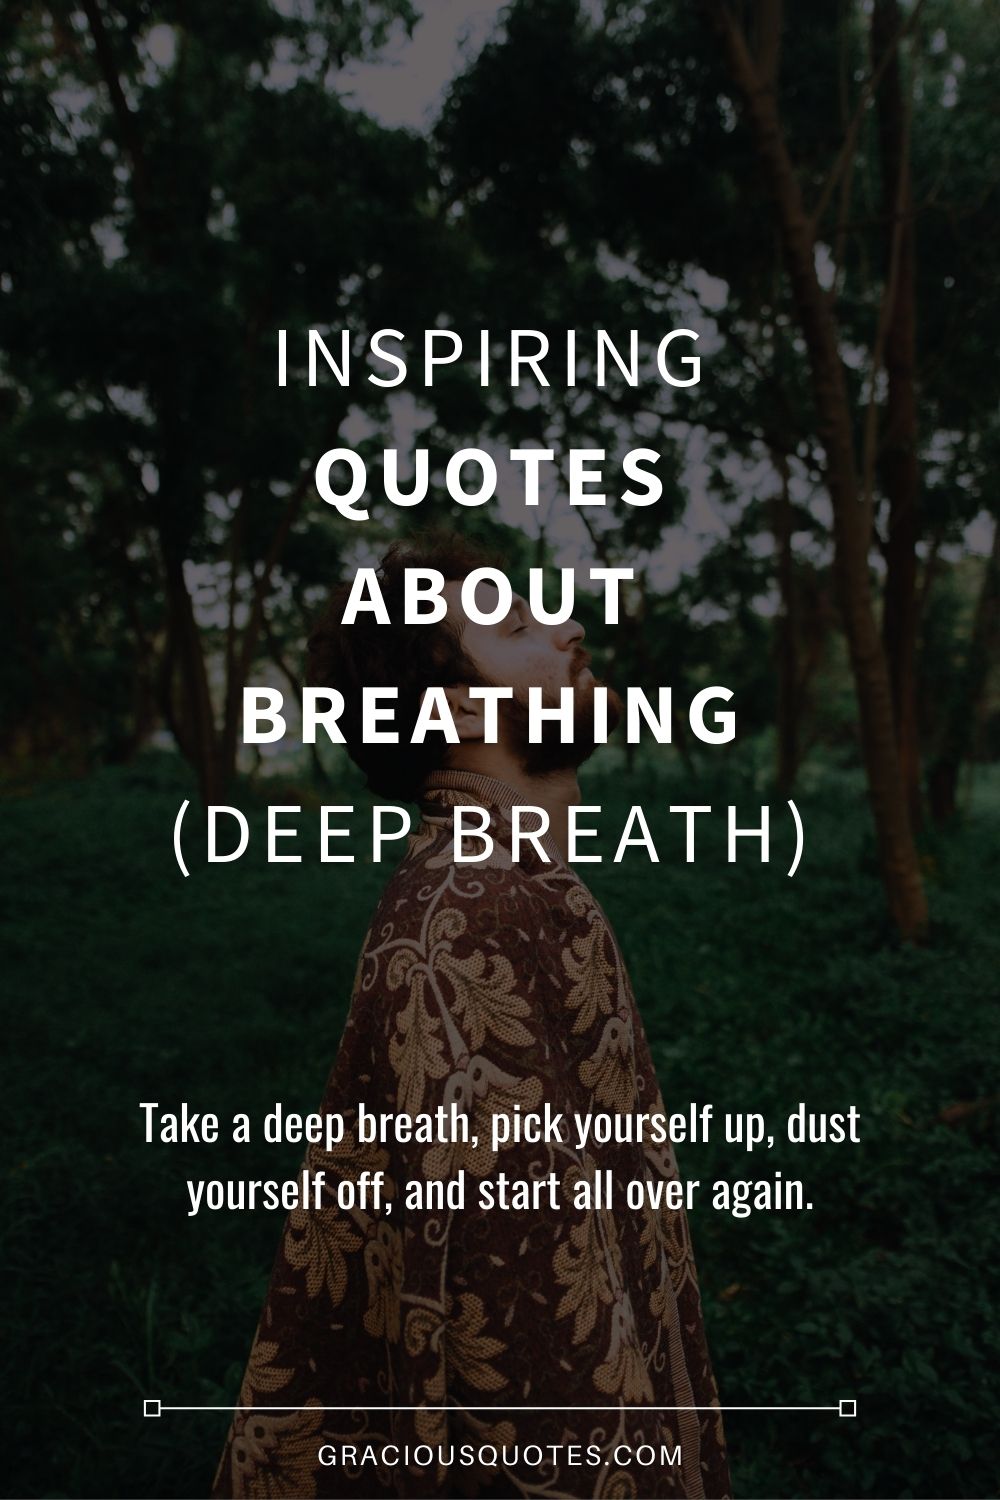 Inspiring Quotes About Breathing (DEEP BREATH) - Gracious Quotes